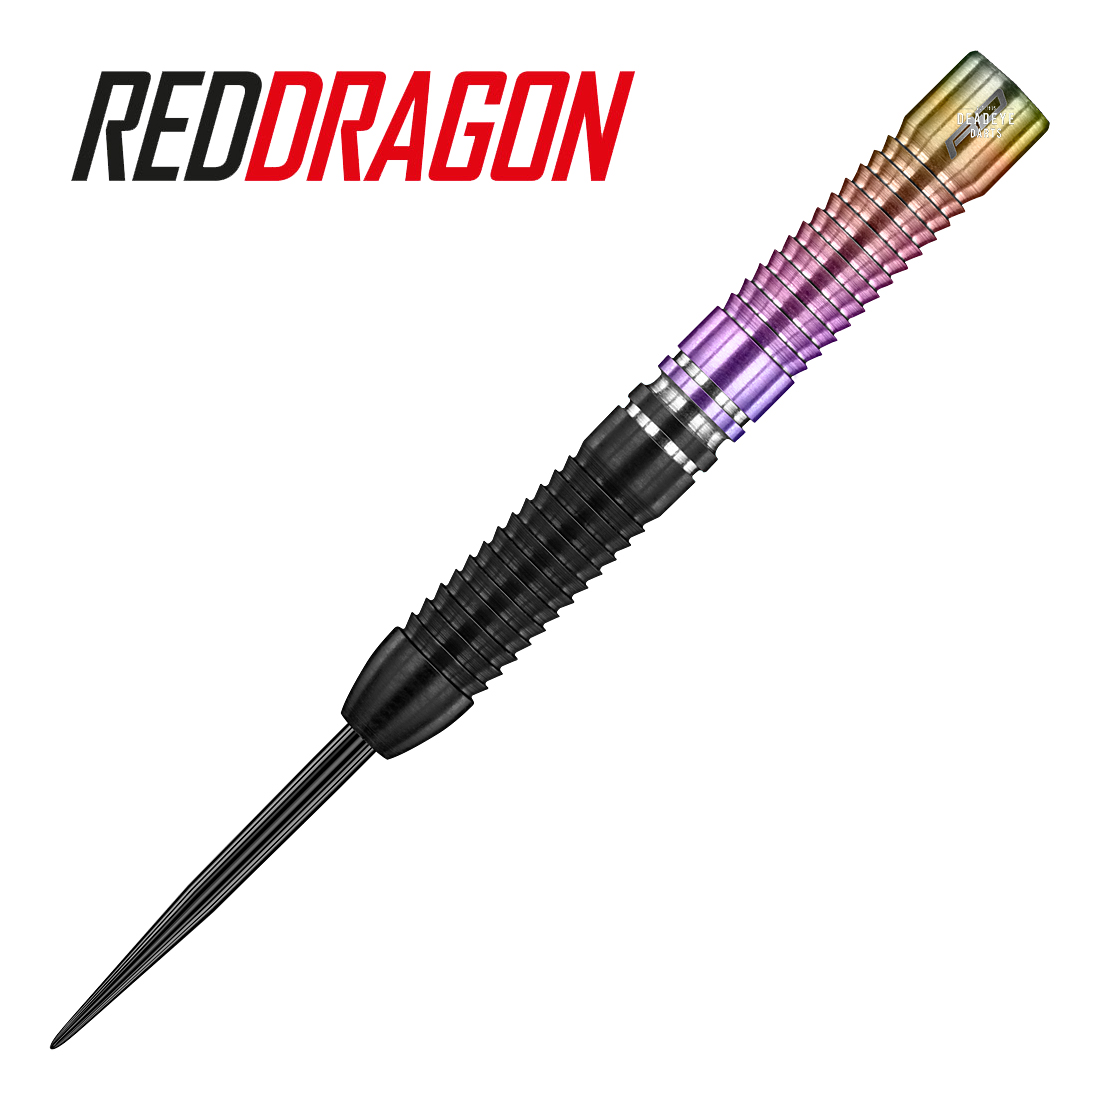 Review of Red Dragon Peter Wright Snakebite 21g World Champion 2020 Edition Darts